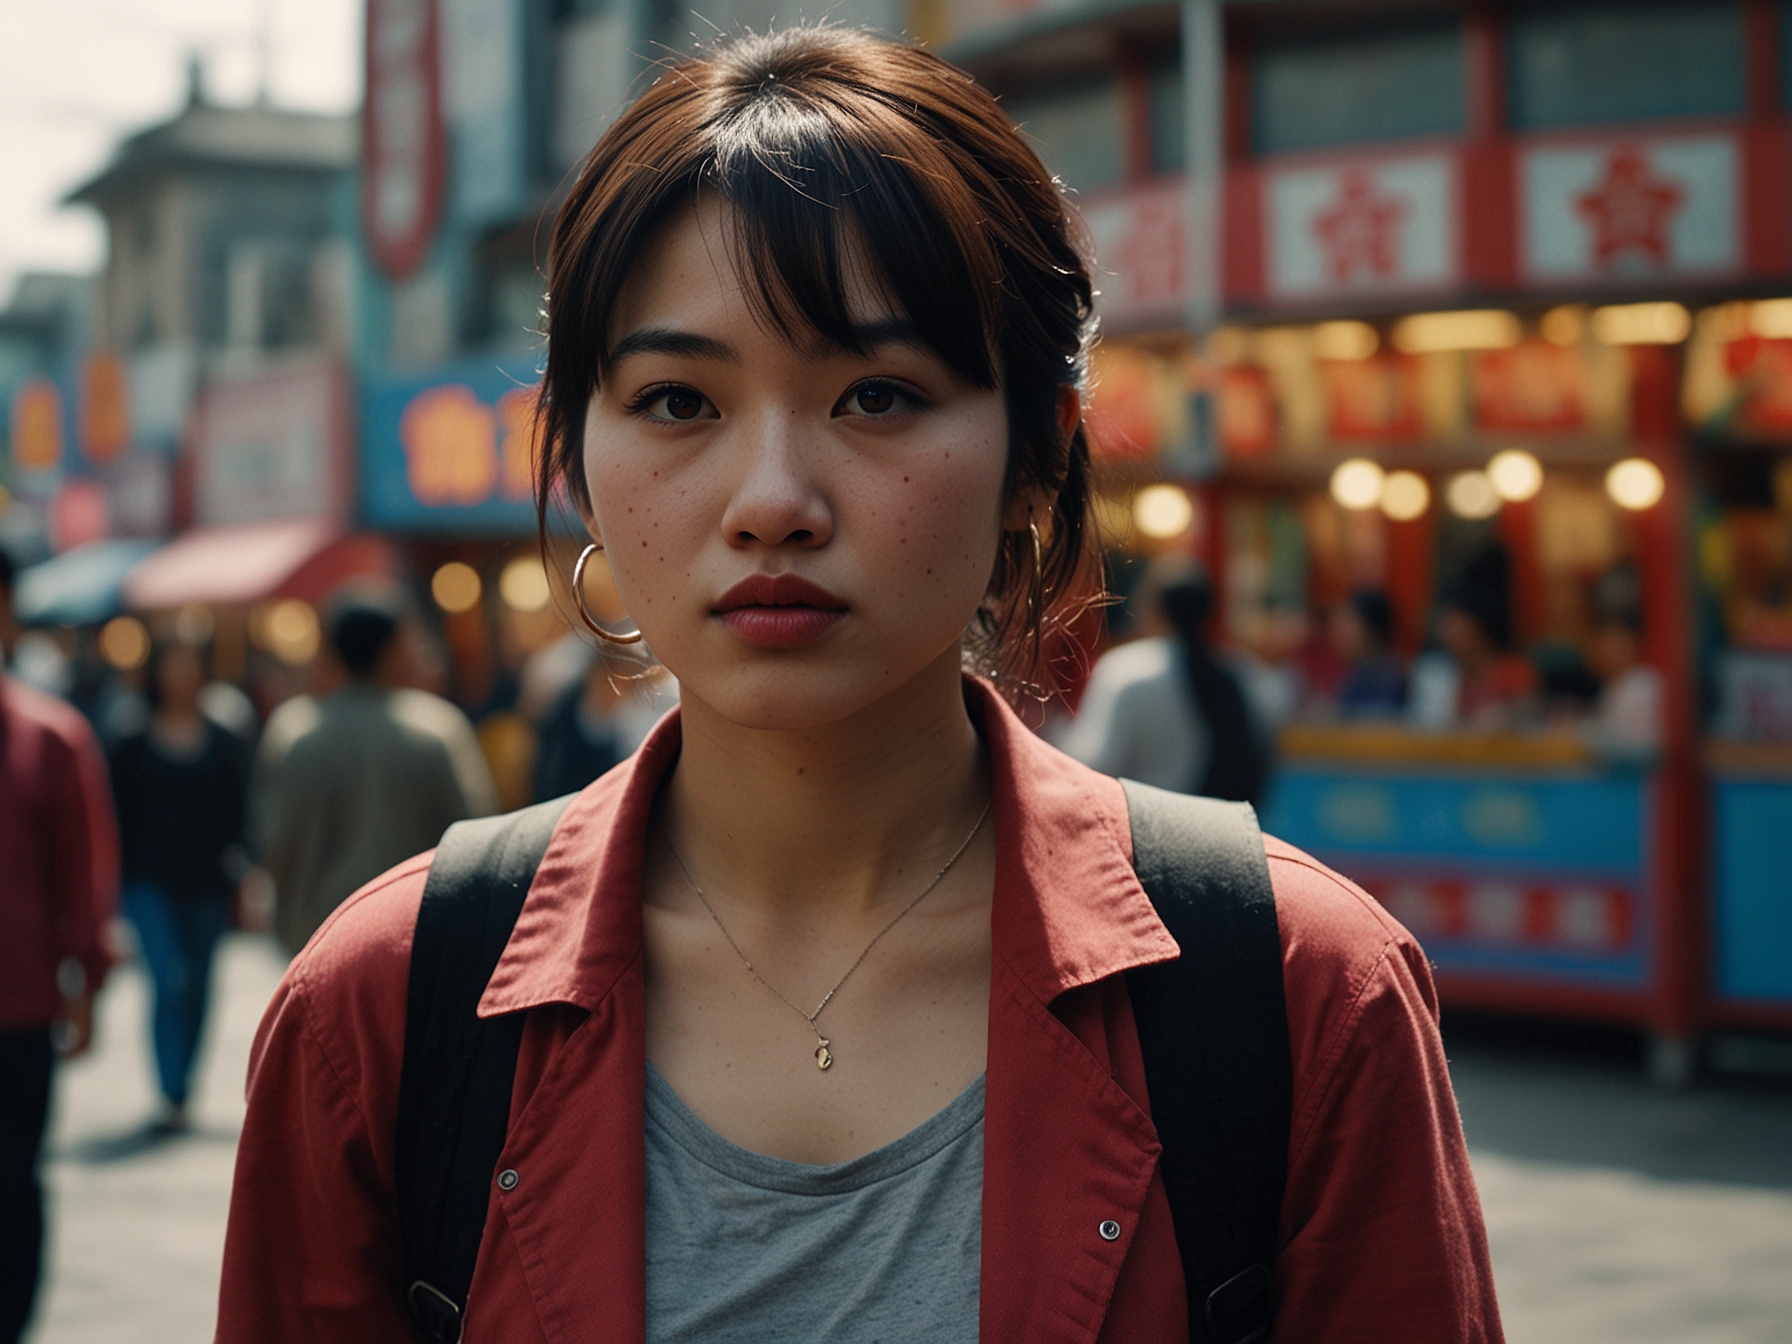 A still from 'Friday, Funfair' depicting the lead female character navigating the bustling urban streets of China, symbolizing the societal pressures and personal challenges faced by women in contemporary society.